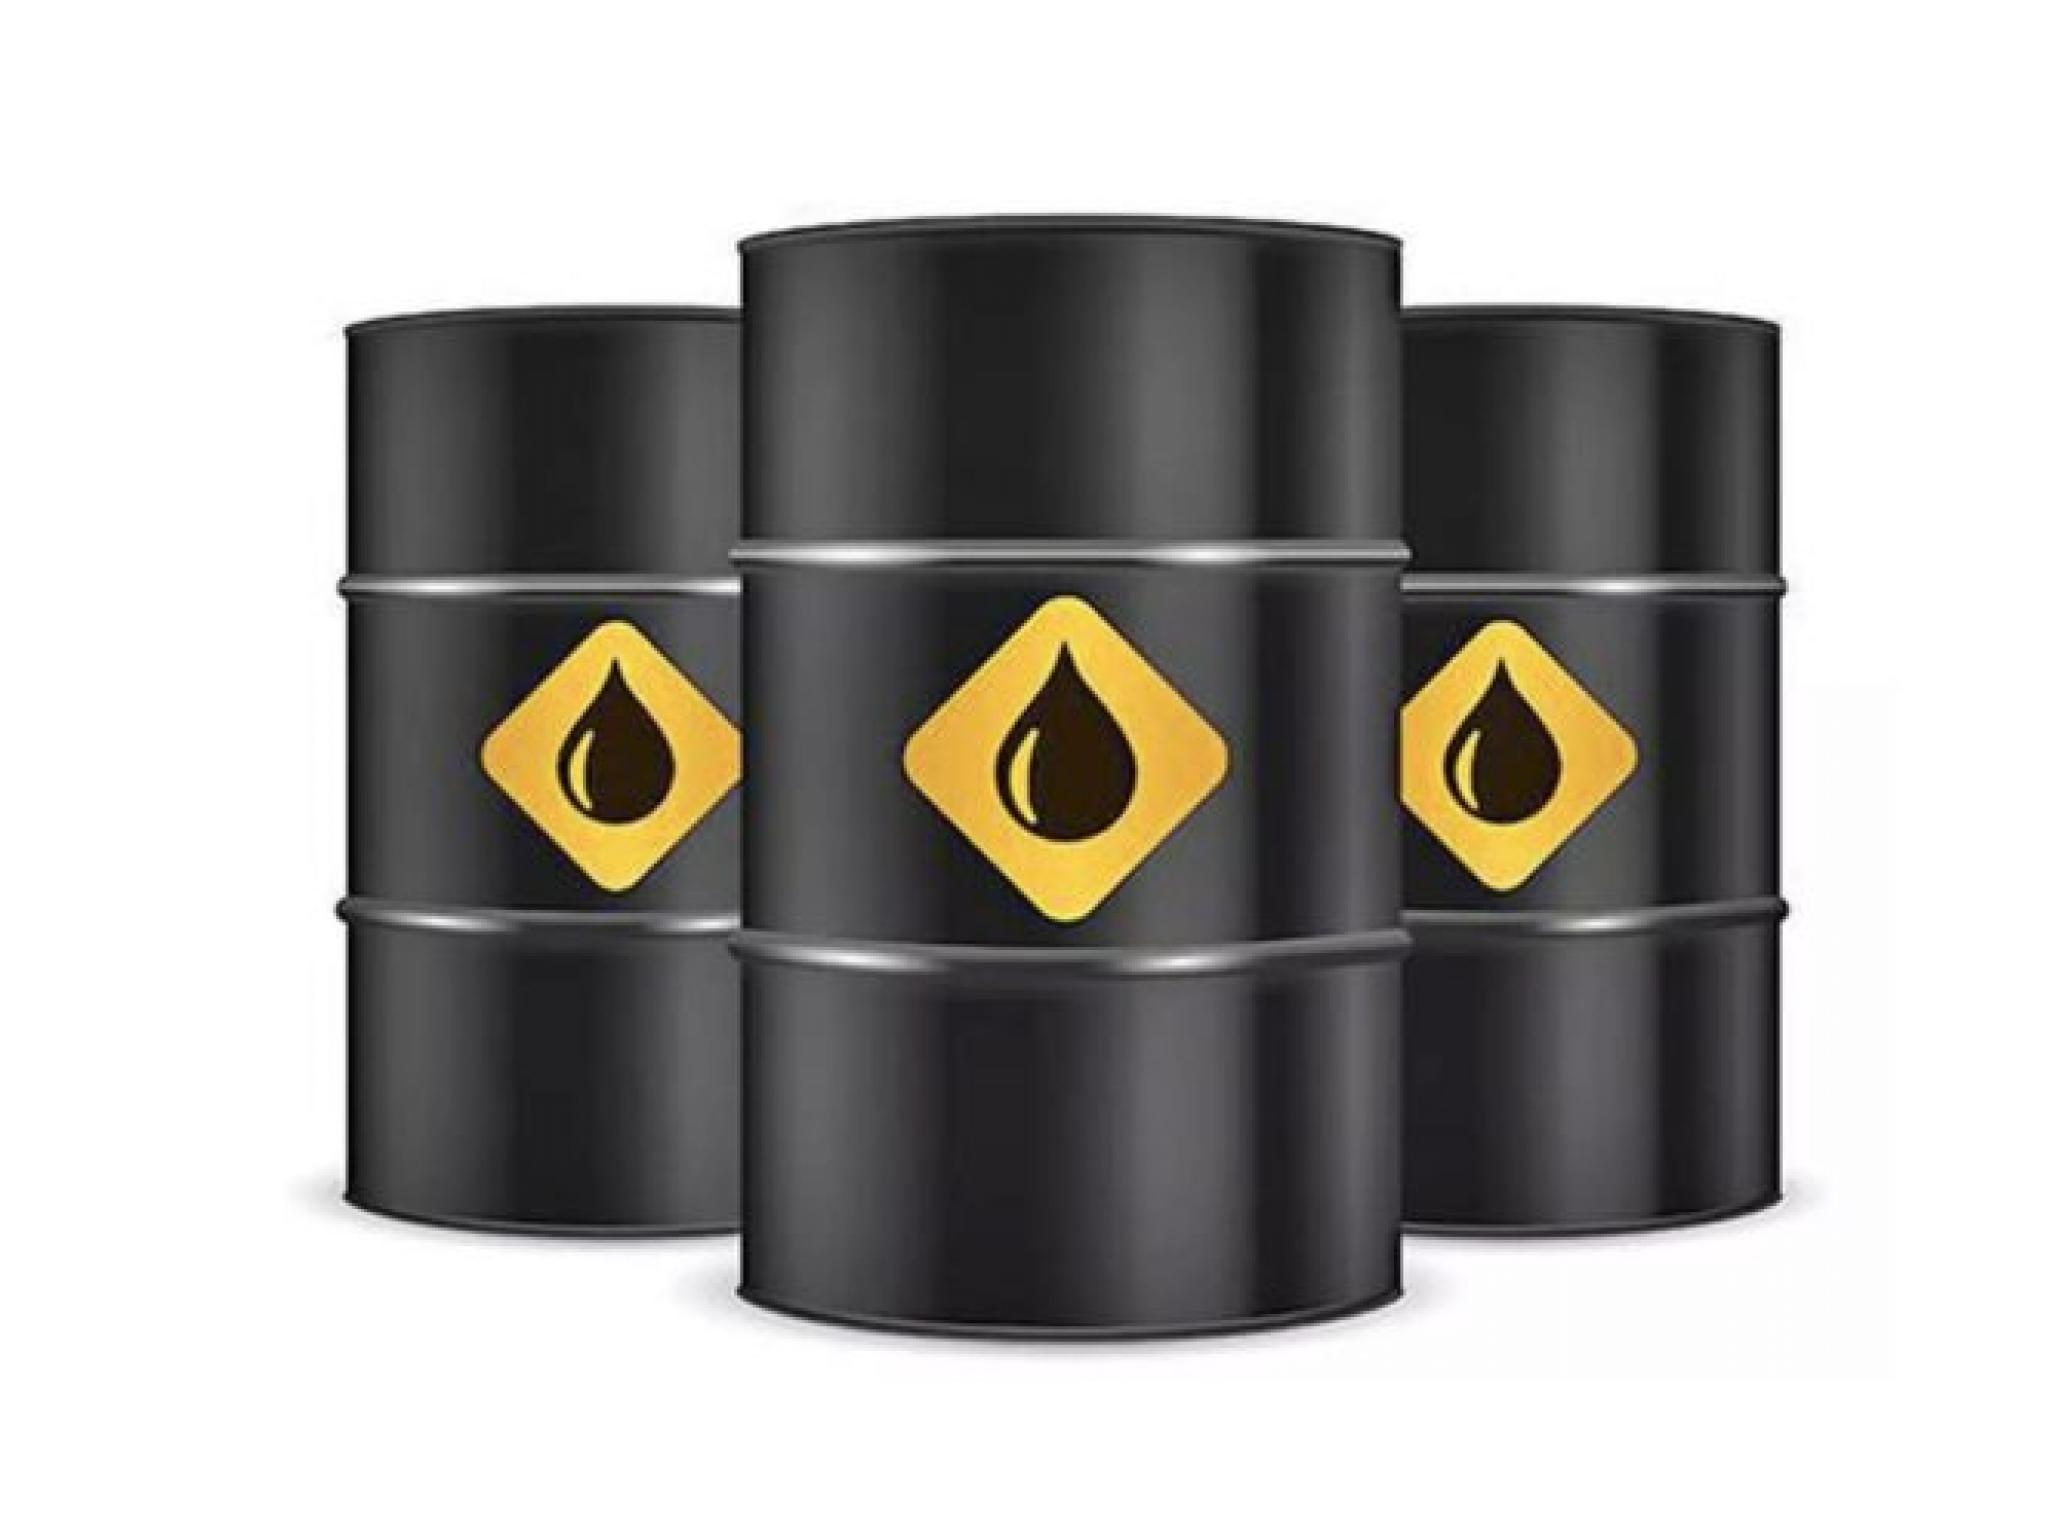  crude-oil-moves-lower-goldman-sachs-posts-upbeat-results 